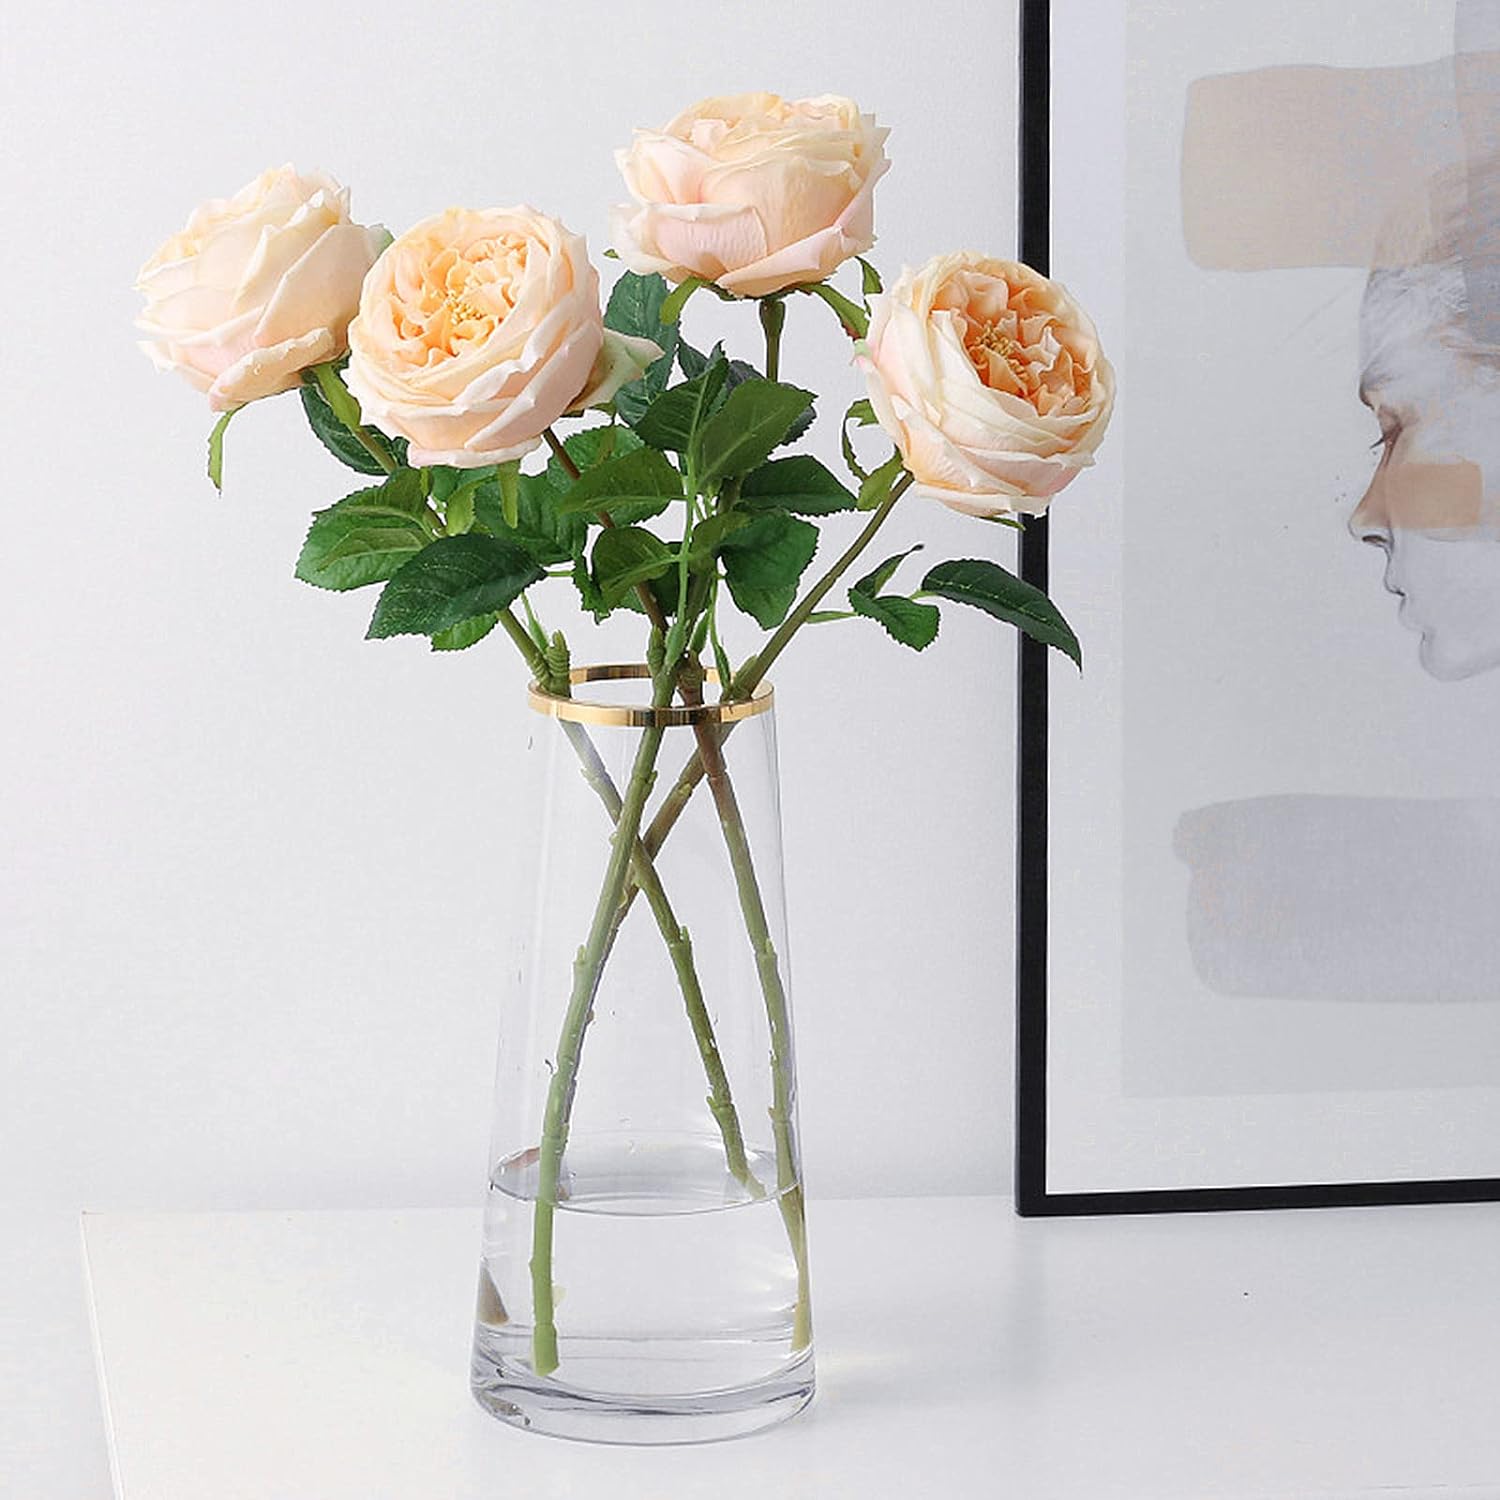 UKELER Artificial Roses 4 Pcs Real Touch Artificial Flowers Champagne Austin Rose Peony with Stem for Home Decor Flower Arrangement Wedding Party Decoration